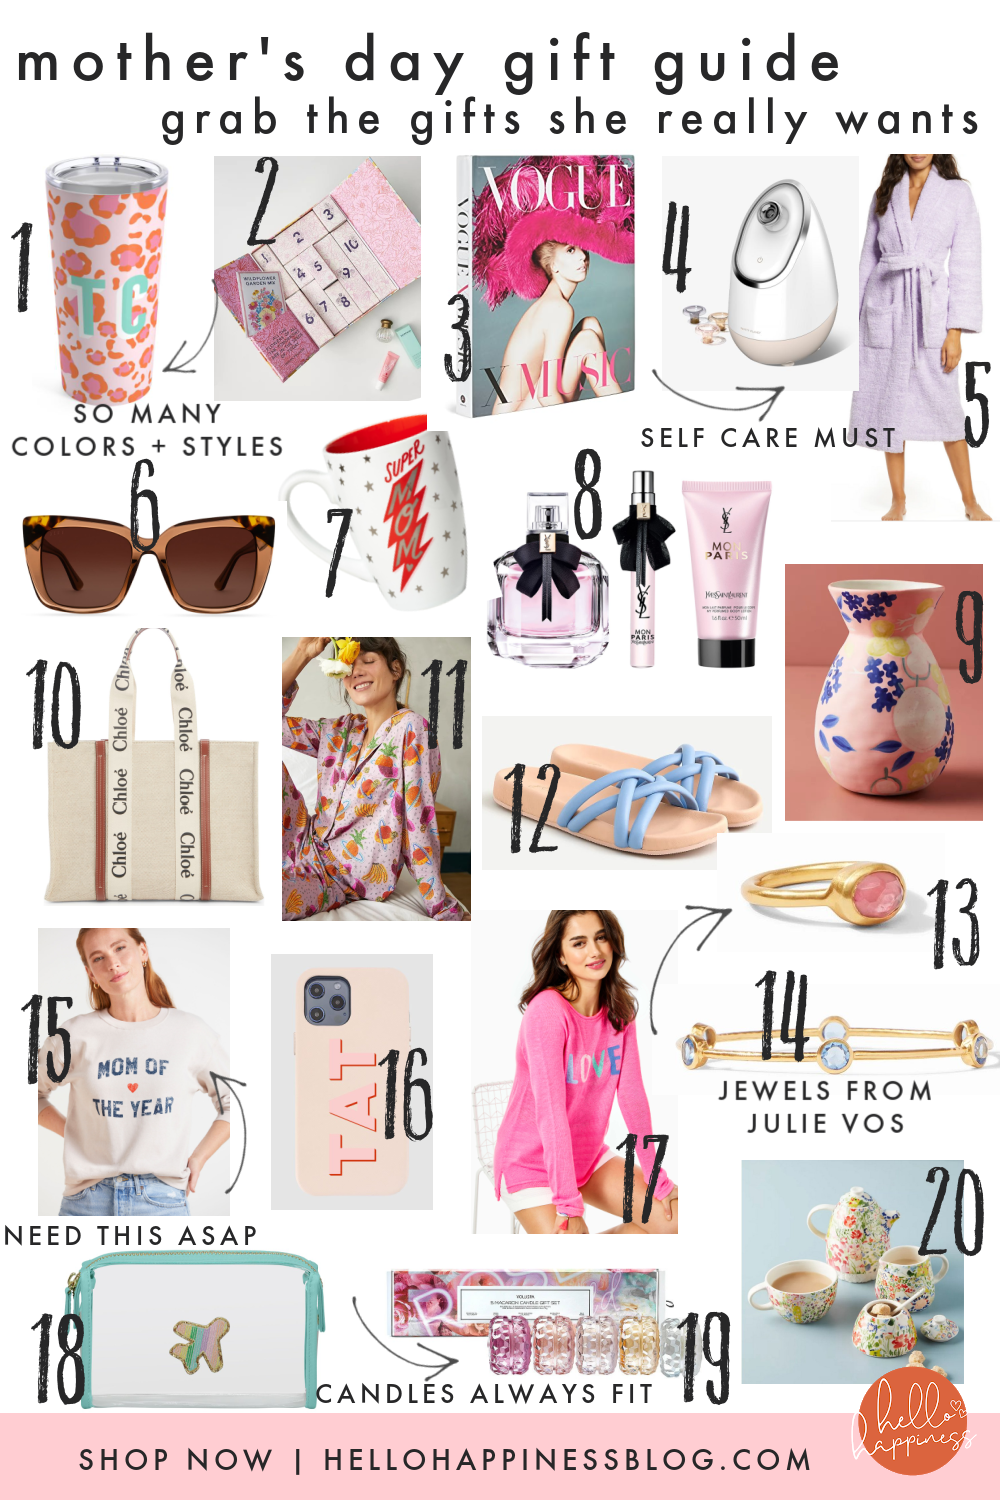 Mother's Day Gift Guide by popular Nashville life and style blog, Hello Happiness: collage image of sunglasses, monogram tumbler, super mom mug, pink floral vase, blue strap slide sandals, pink stone ring, blue stone bracelet, Chloe tote bag, citrus print pajamas, YSL perfume, purple robe, Mom of the Year shirt, phone cover, candle votive set, tea set, iconic facial steamer, and cotton candy travel pouch. 